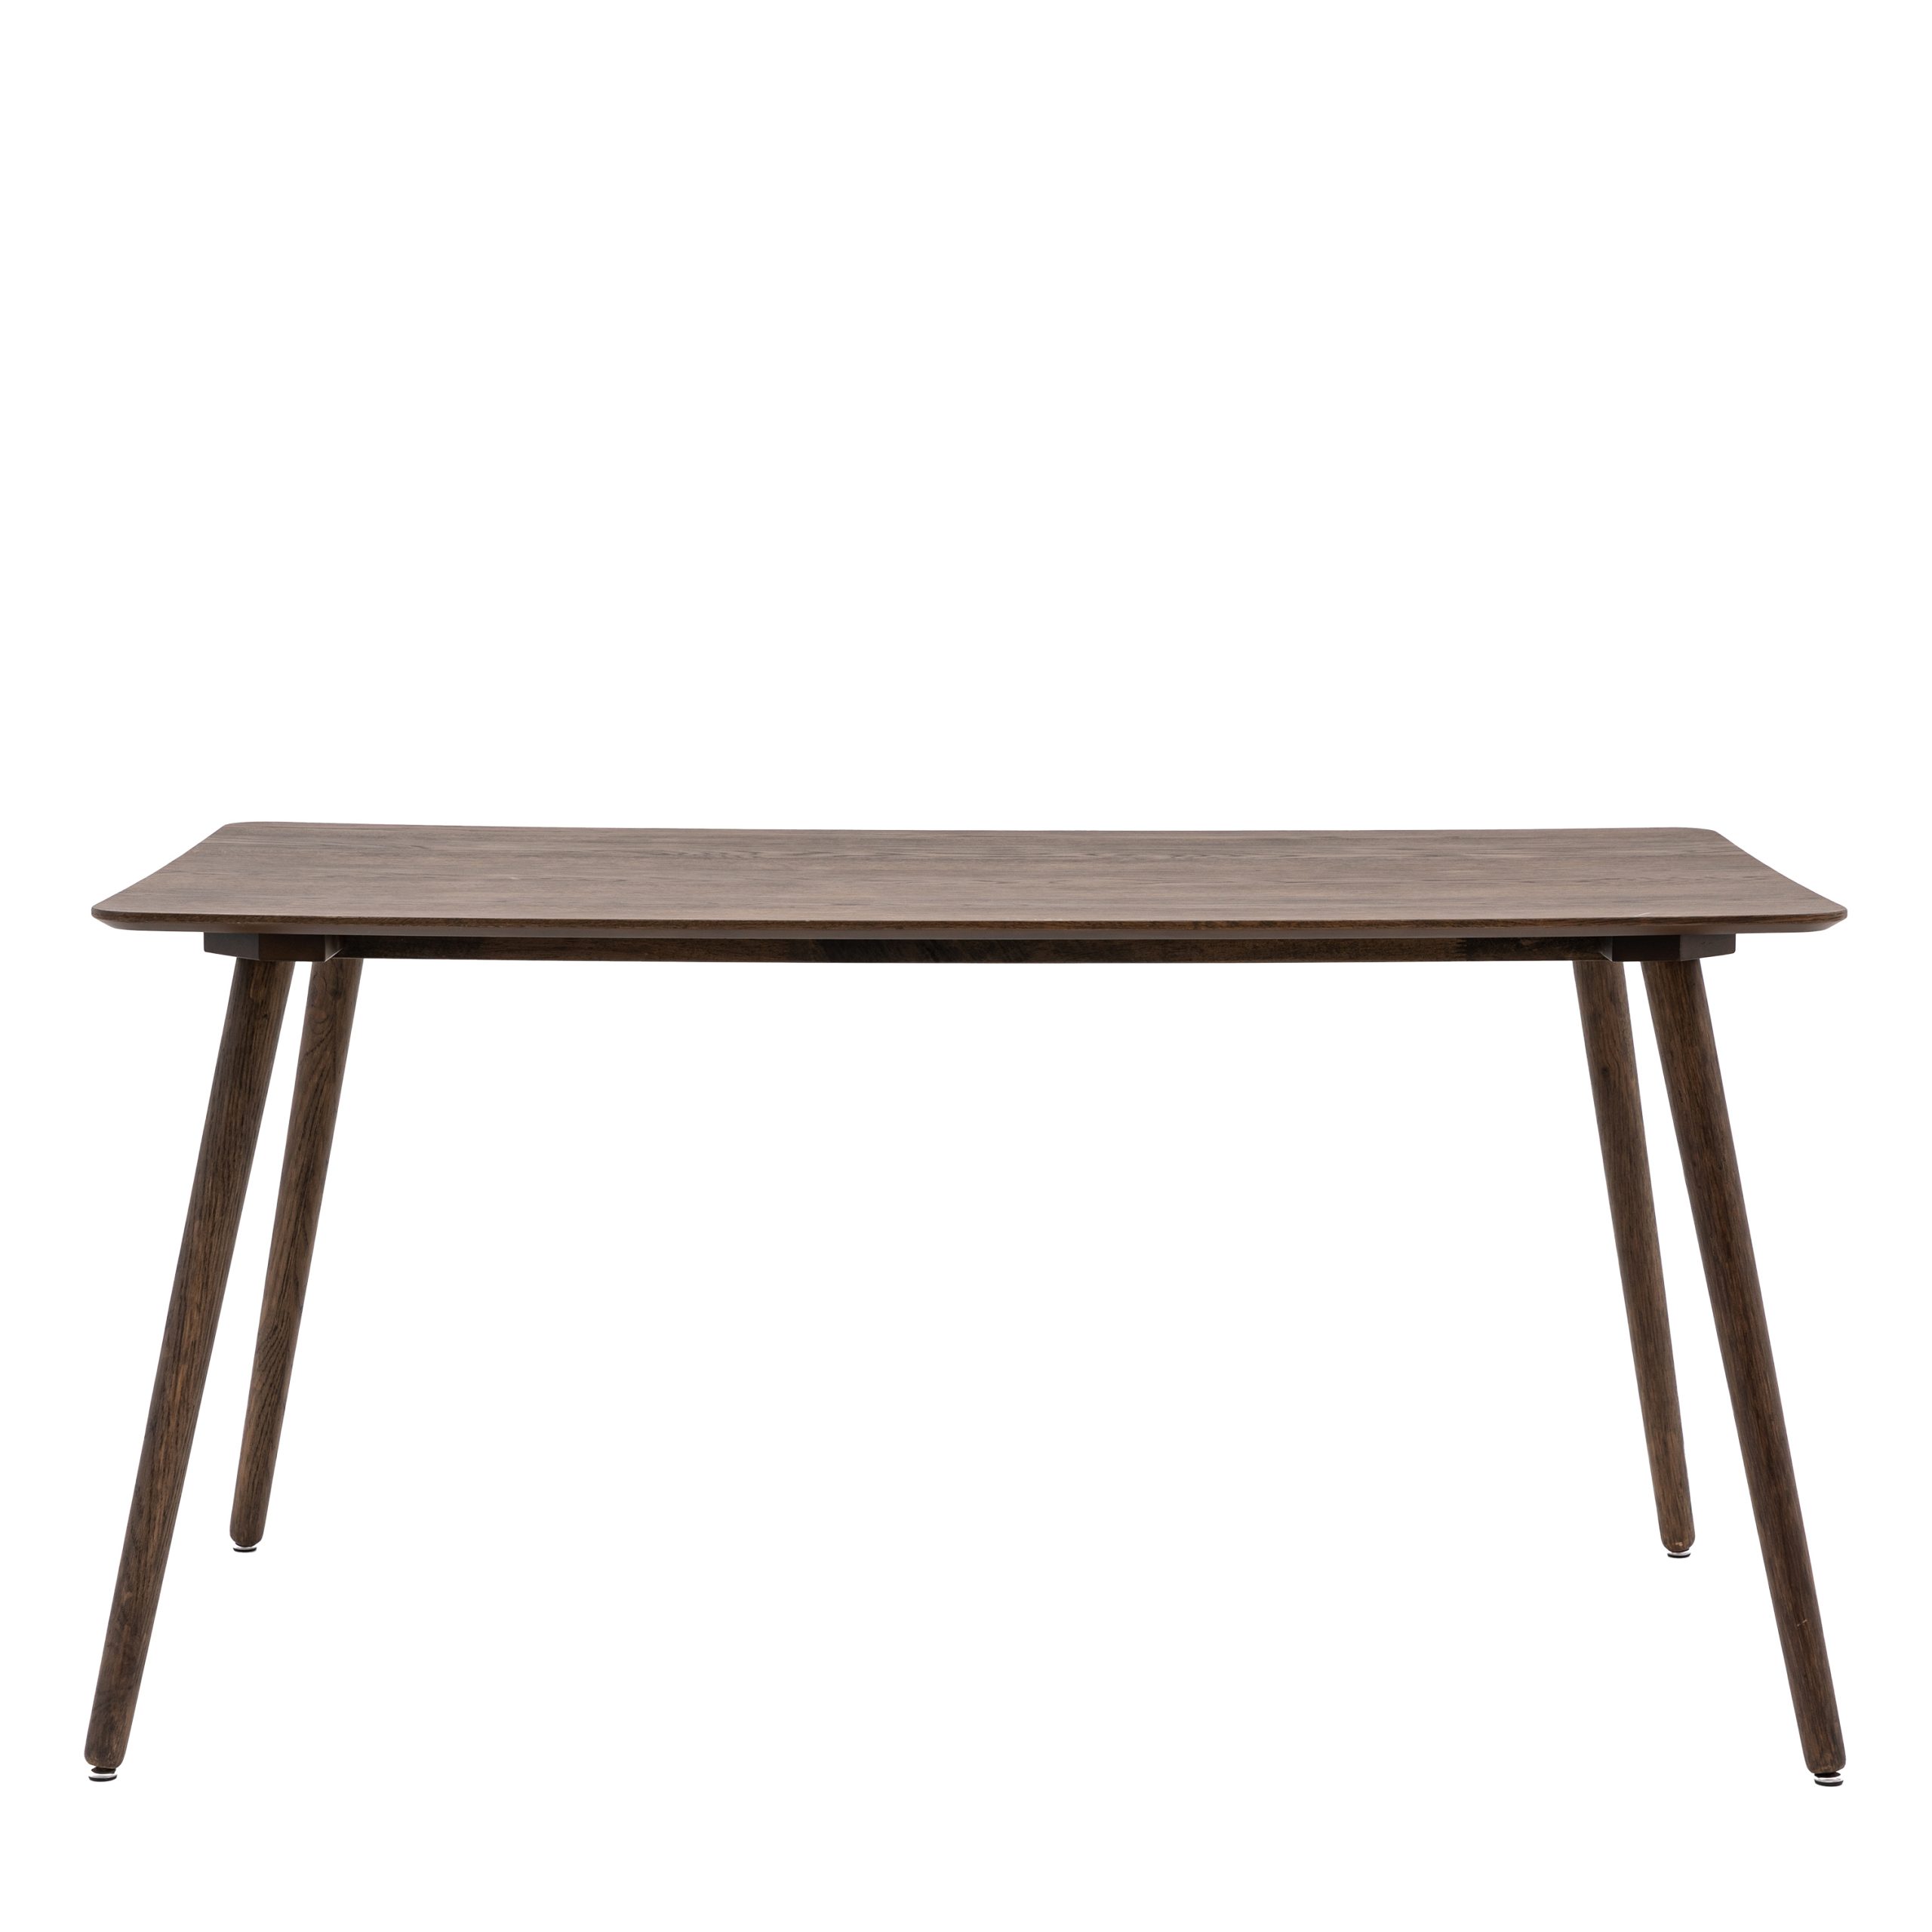 Gallery Direct Hatfield Dining Table Smoked